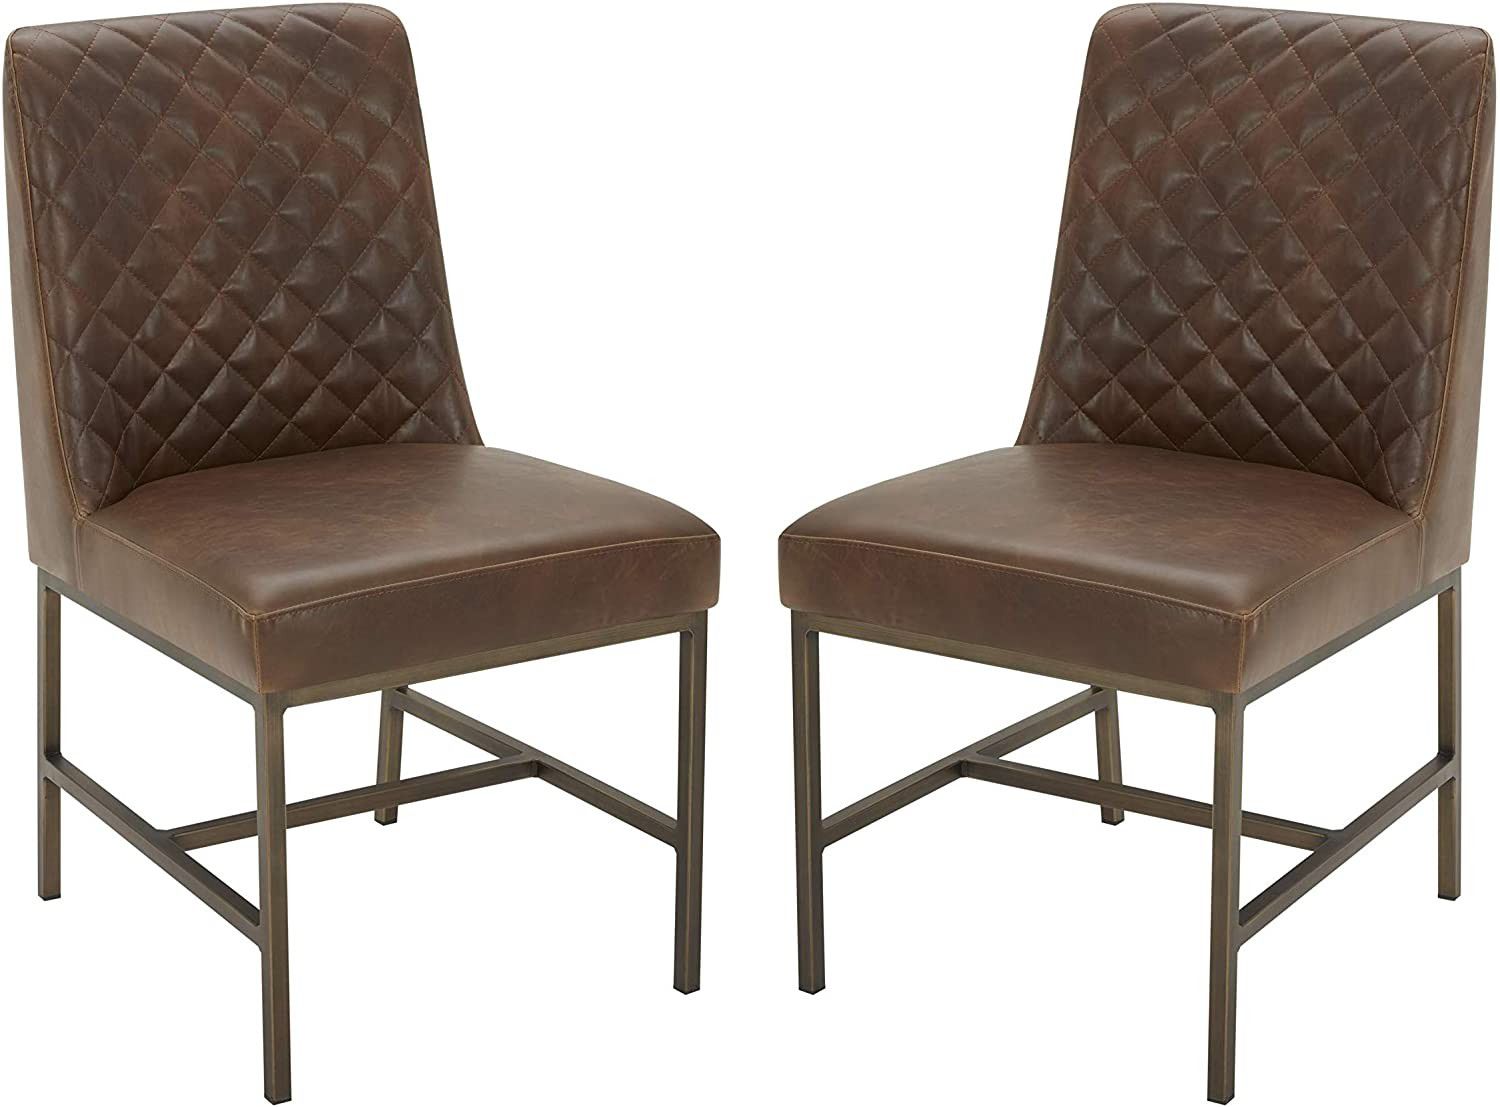 Classic Modern Looks, Armless Profile, Faux Leather Diamond-Stitched Pattern Accent Set of 2 Brown